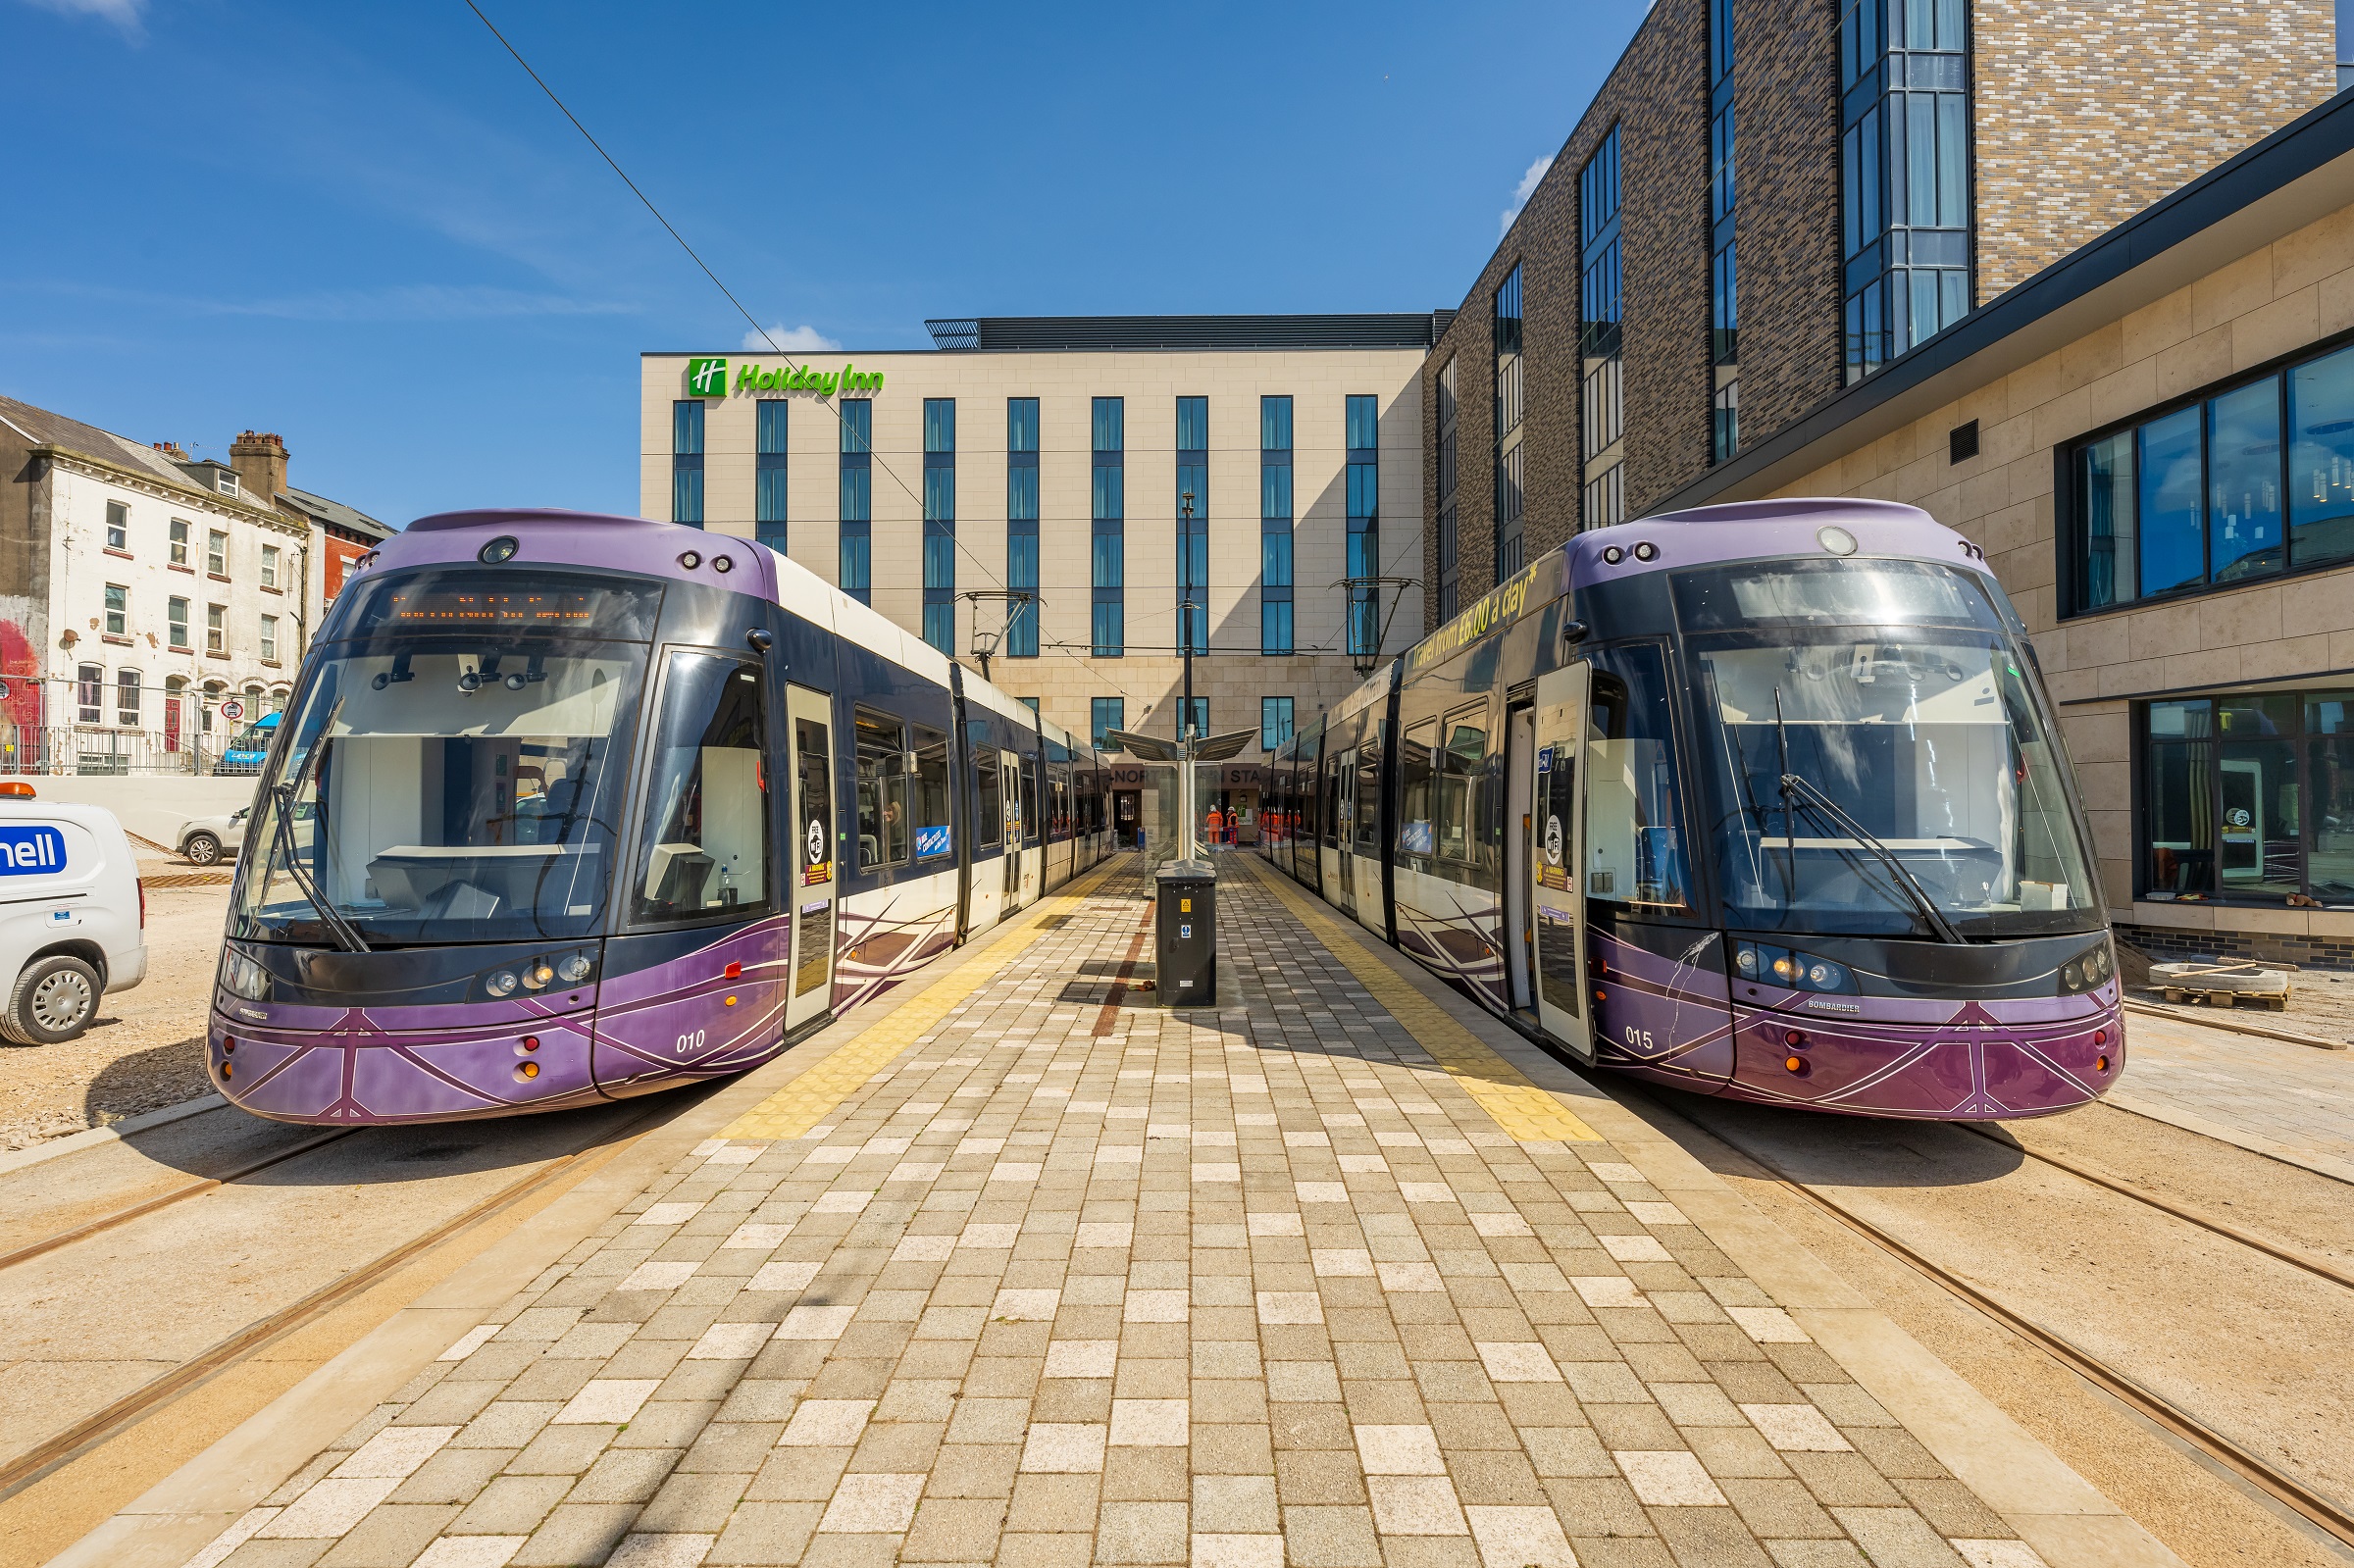 A photo showing two purple trams at a station surrounded by a Holiday Inn hotel